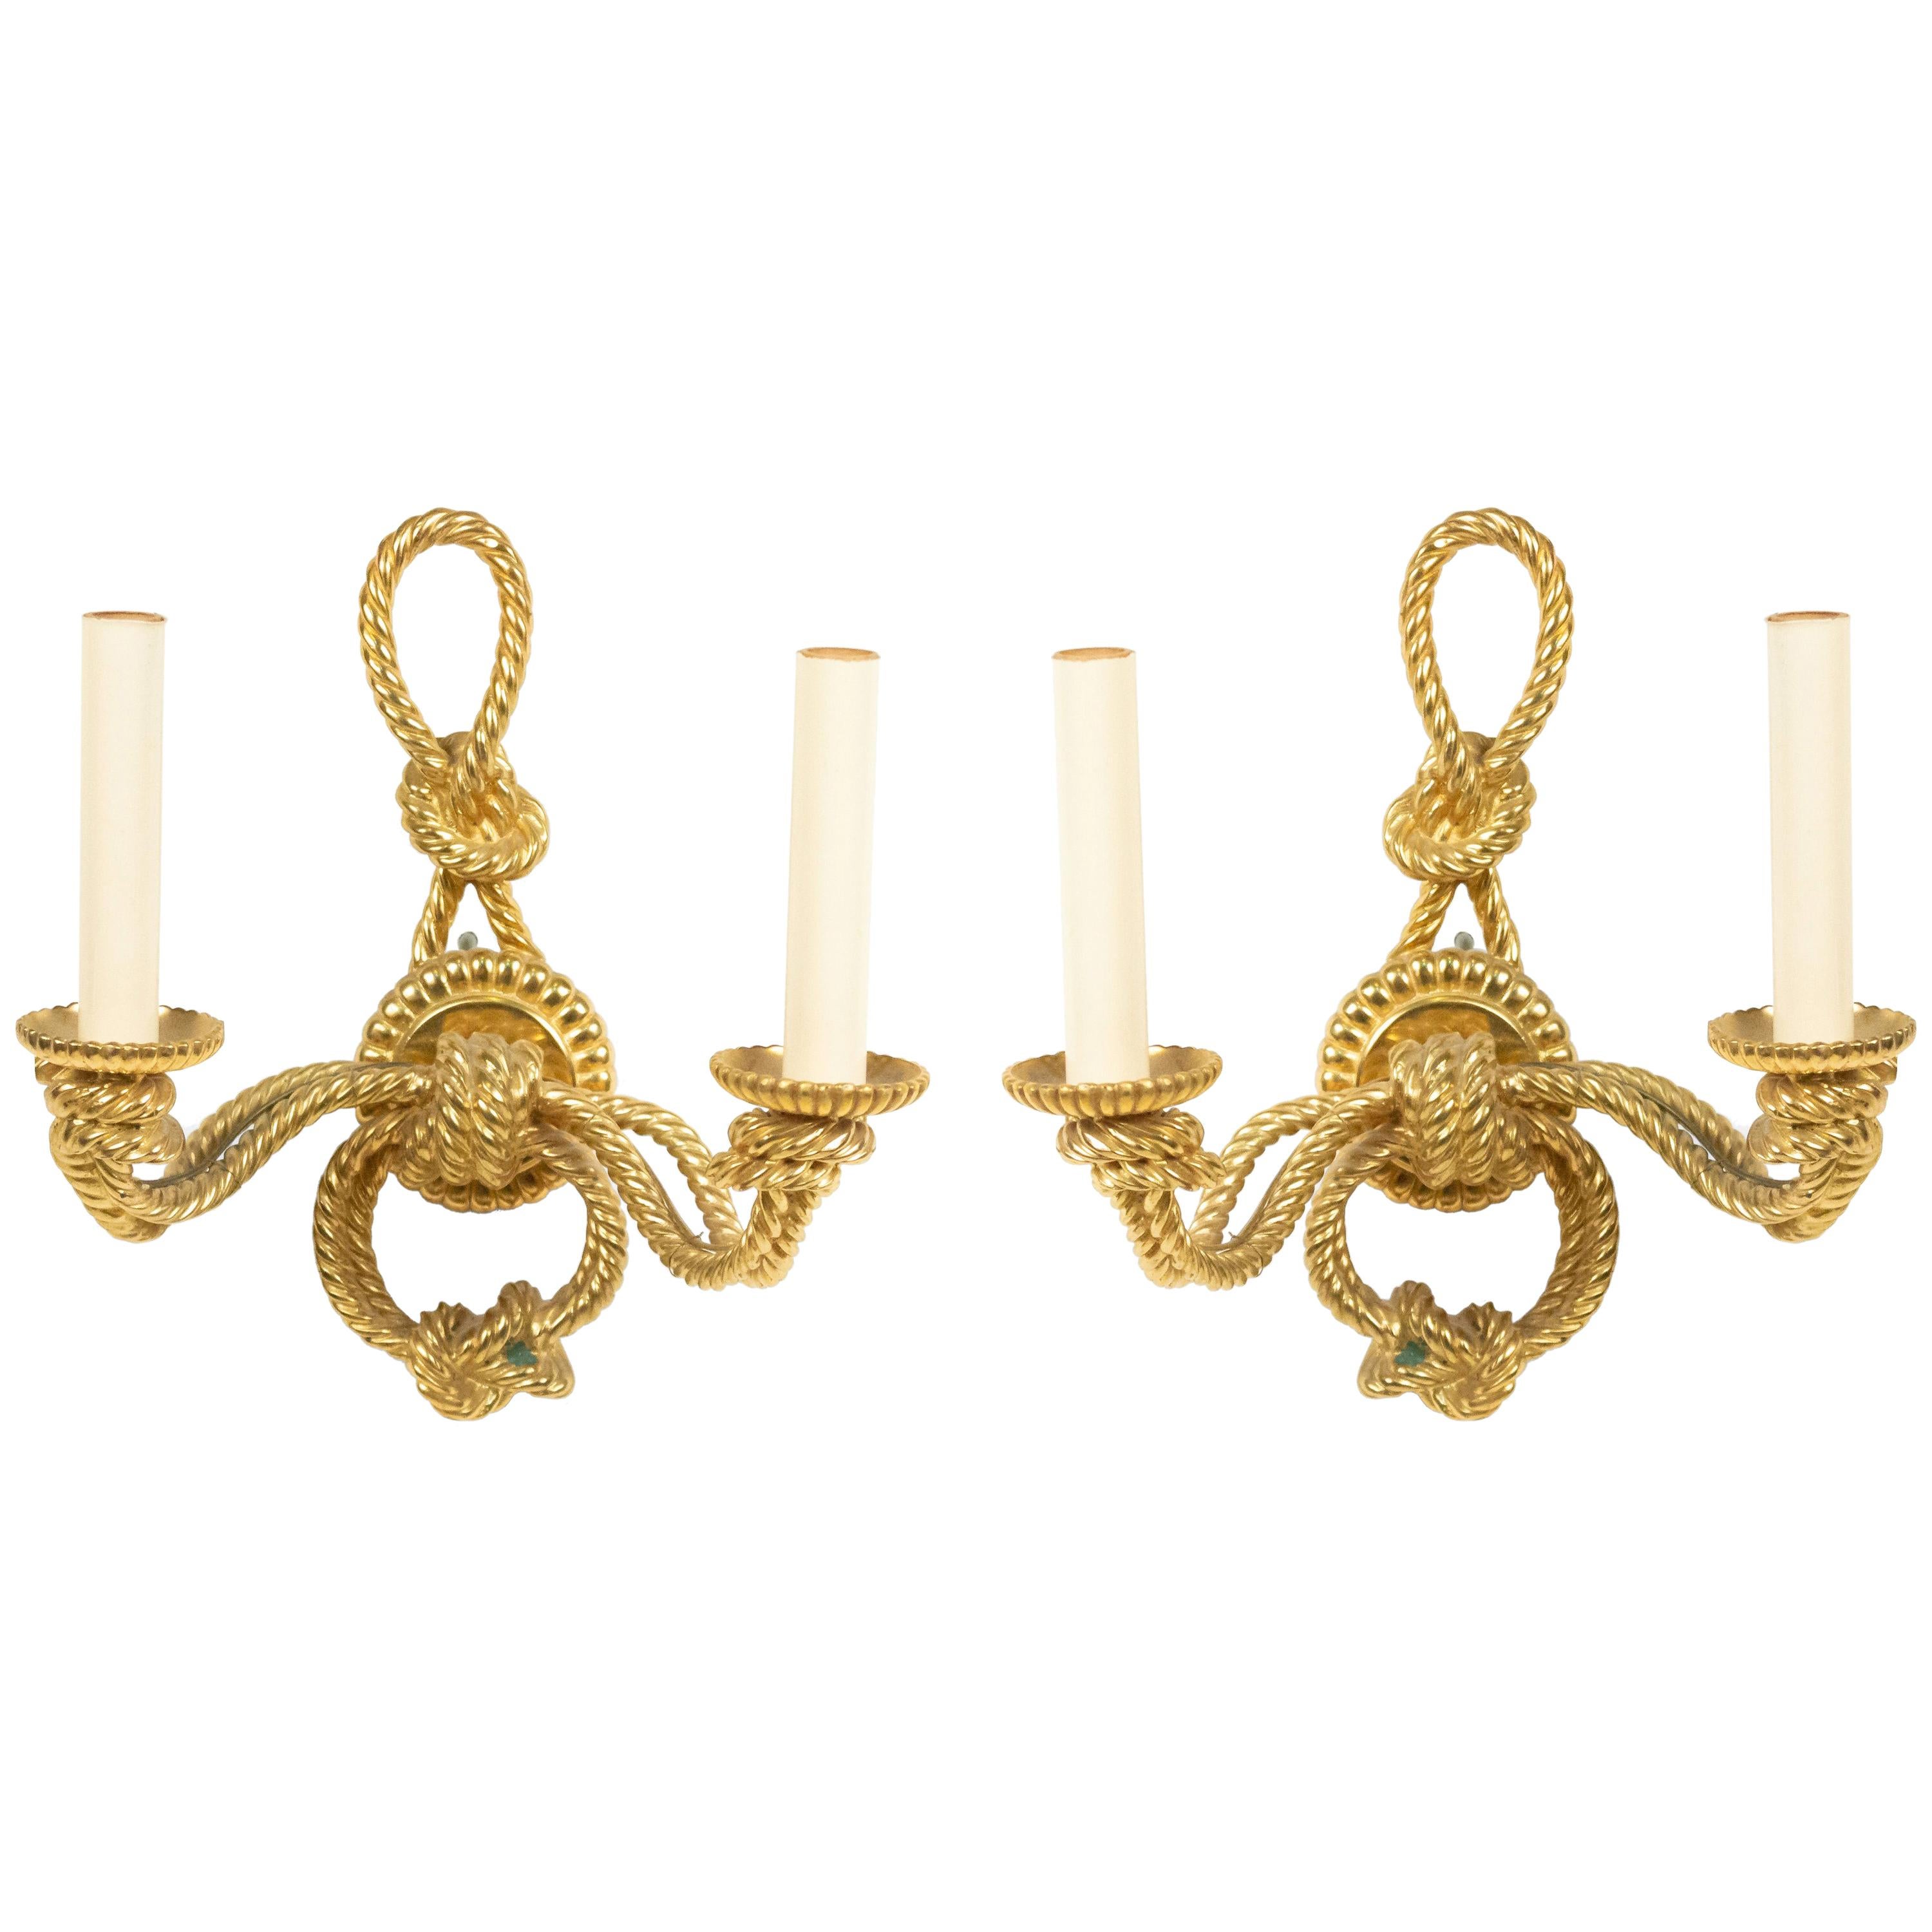 Rope and Tassel Gilt Bronze Wall Sconce